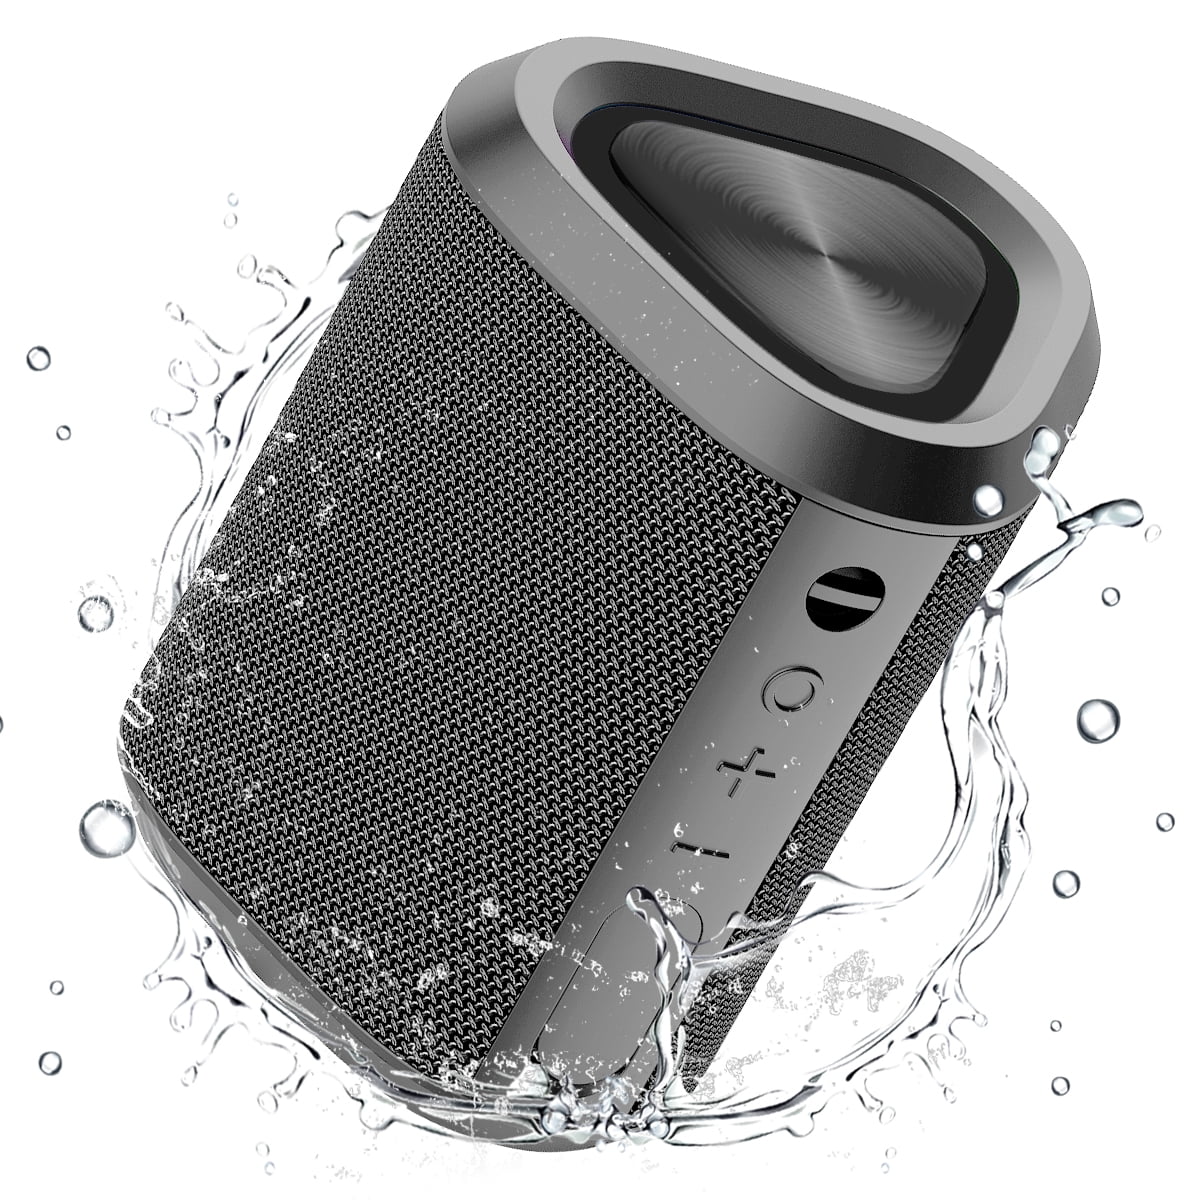  Portable Bluetooth Speaker,3D Stereo Hi-Fi Bass Upgraded  Wireless Bluetooth Speaker 5.0 with 18H Playtime,Built-in Mic,FM  Radio,100Ft Wireless Range,Portable Speakers for Outdoors,Travel Bass :  Electronics